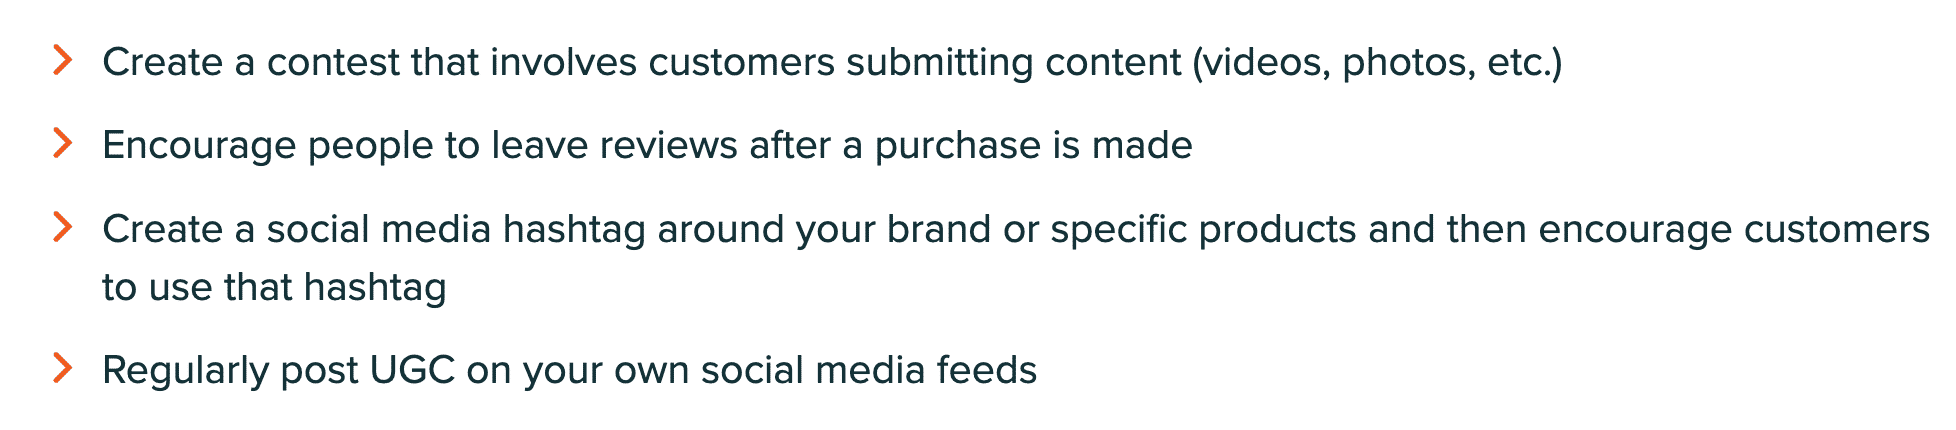 List of ways to encourage your customers to create user-generated content